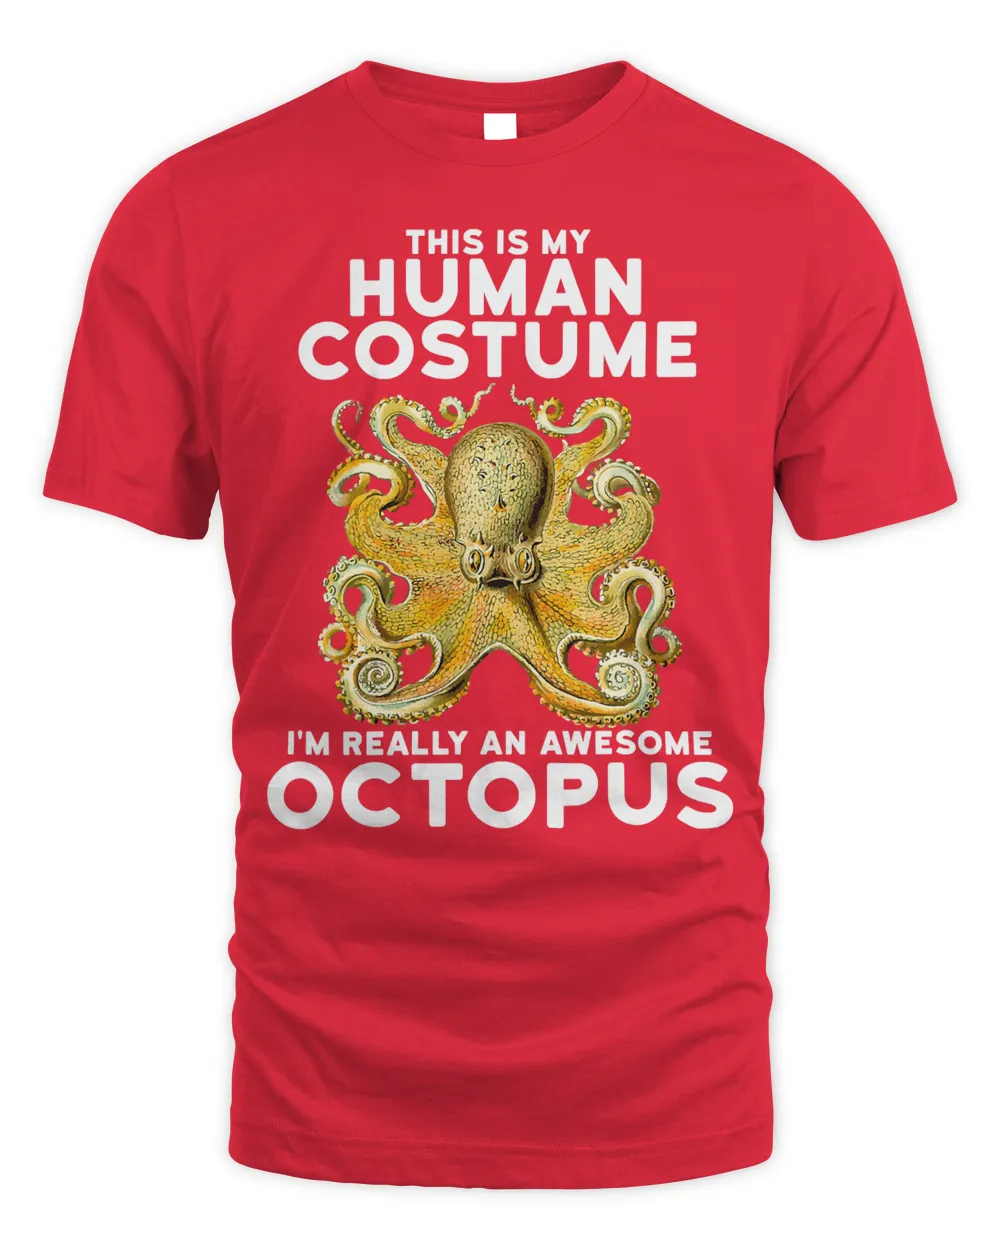 This Is My Human Costume I'm Really An Octopus Shirt T-Shirt